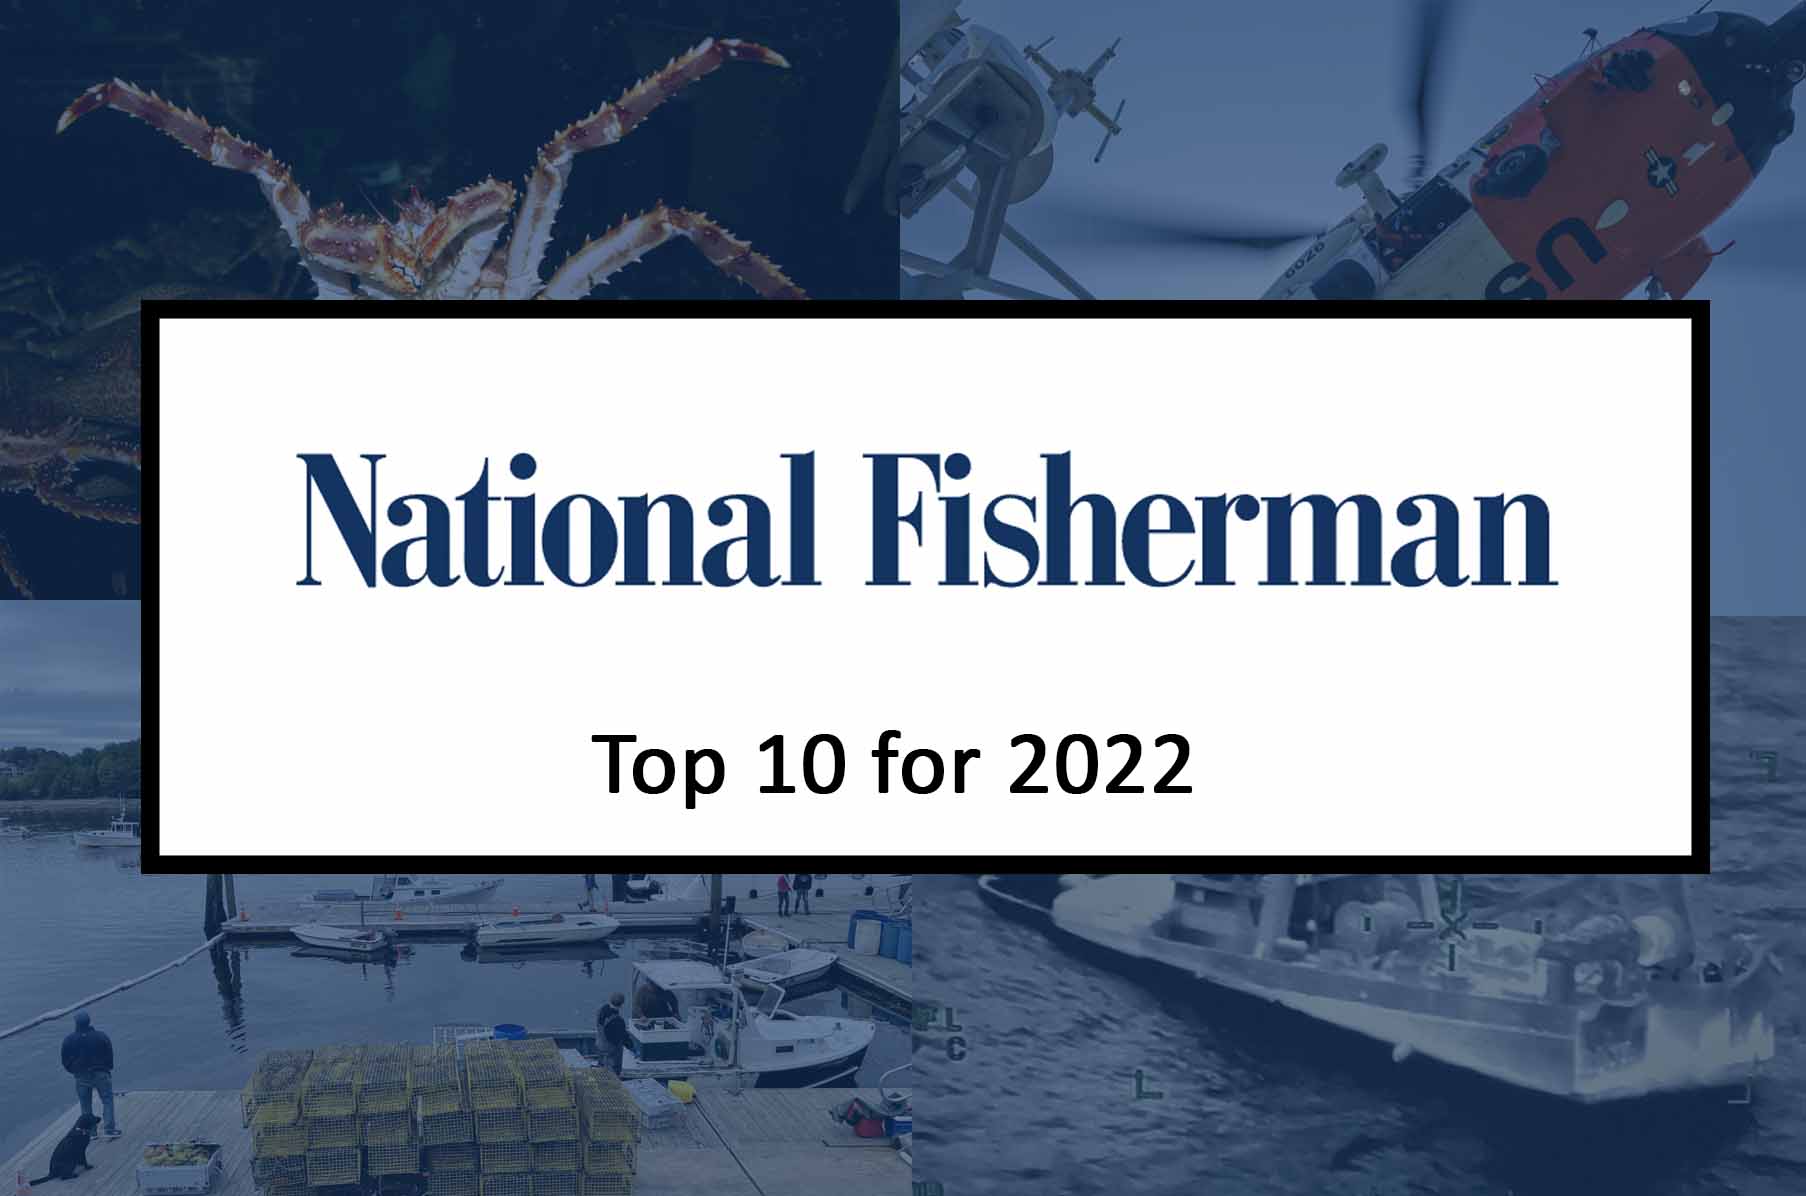 The top 10 National Fisherman stories of 2022